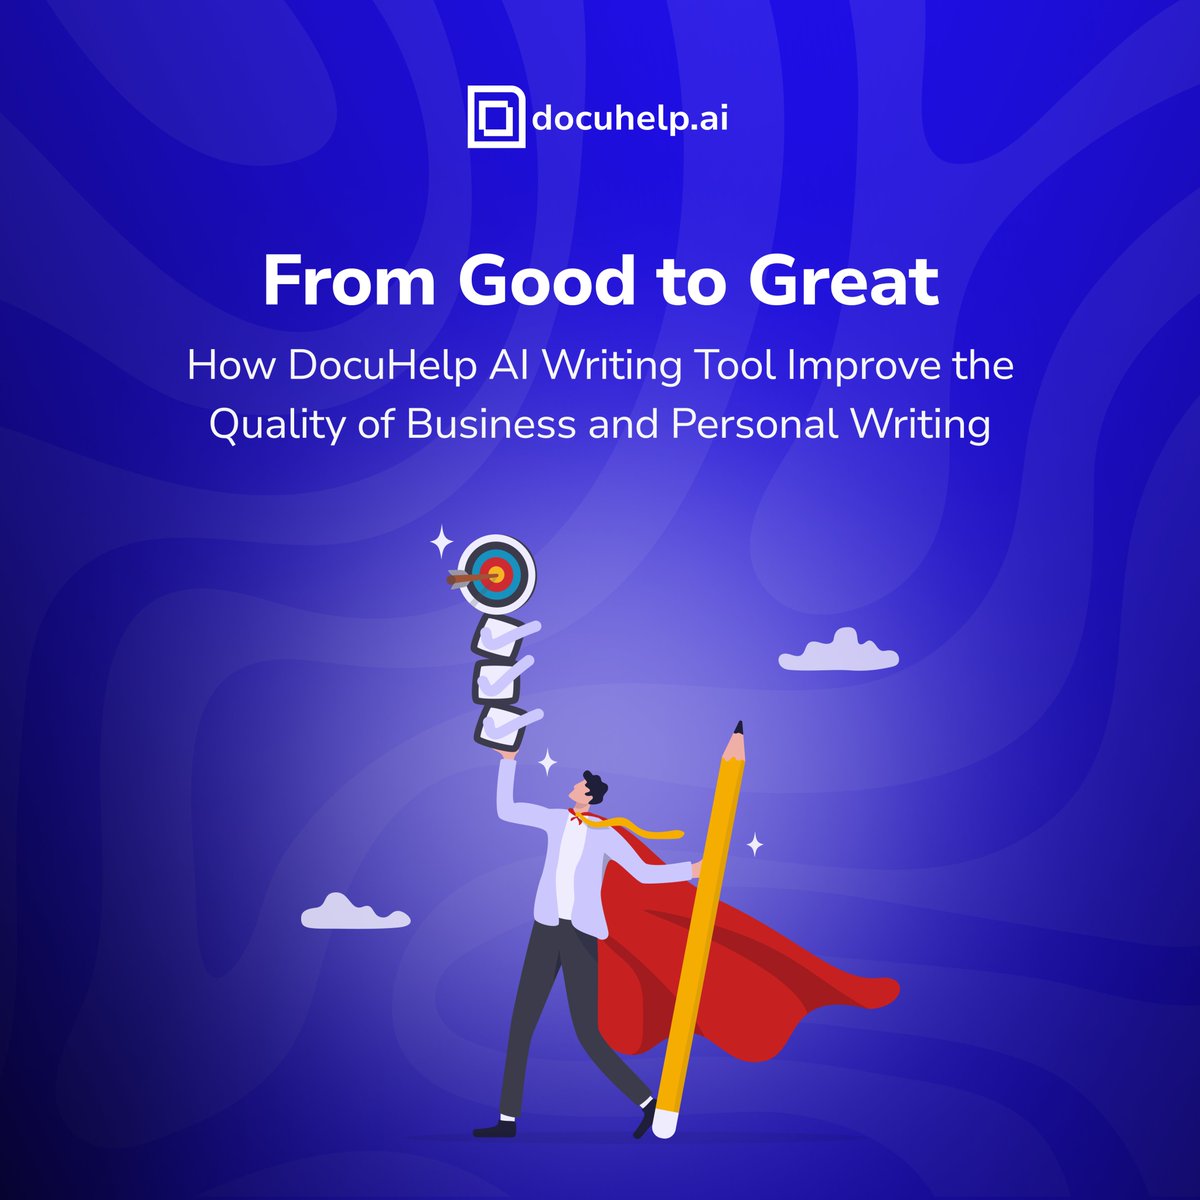 💼Impress your boss with flawless emails and captivate your audience with blog posts that shine. 

Don't settle for good when you can be GREAT! 🌟

👉Visit docuhelp.ai to discover the power of DocuHelp AI and transform your writing today! 

#DocuHelp #AIwritingTool